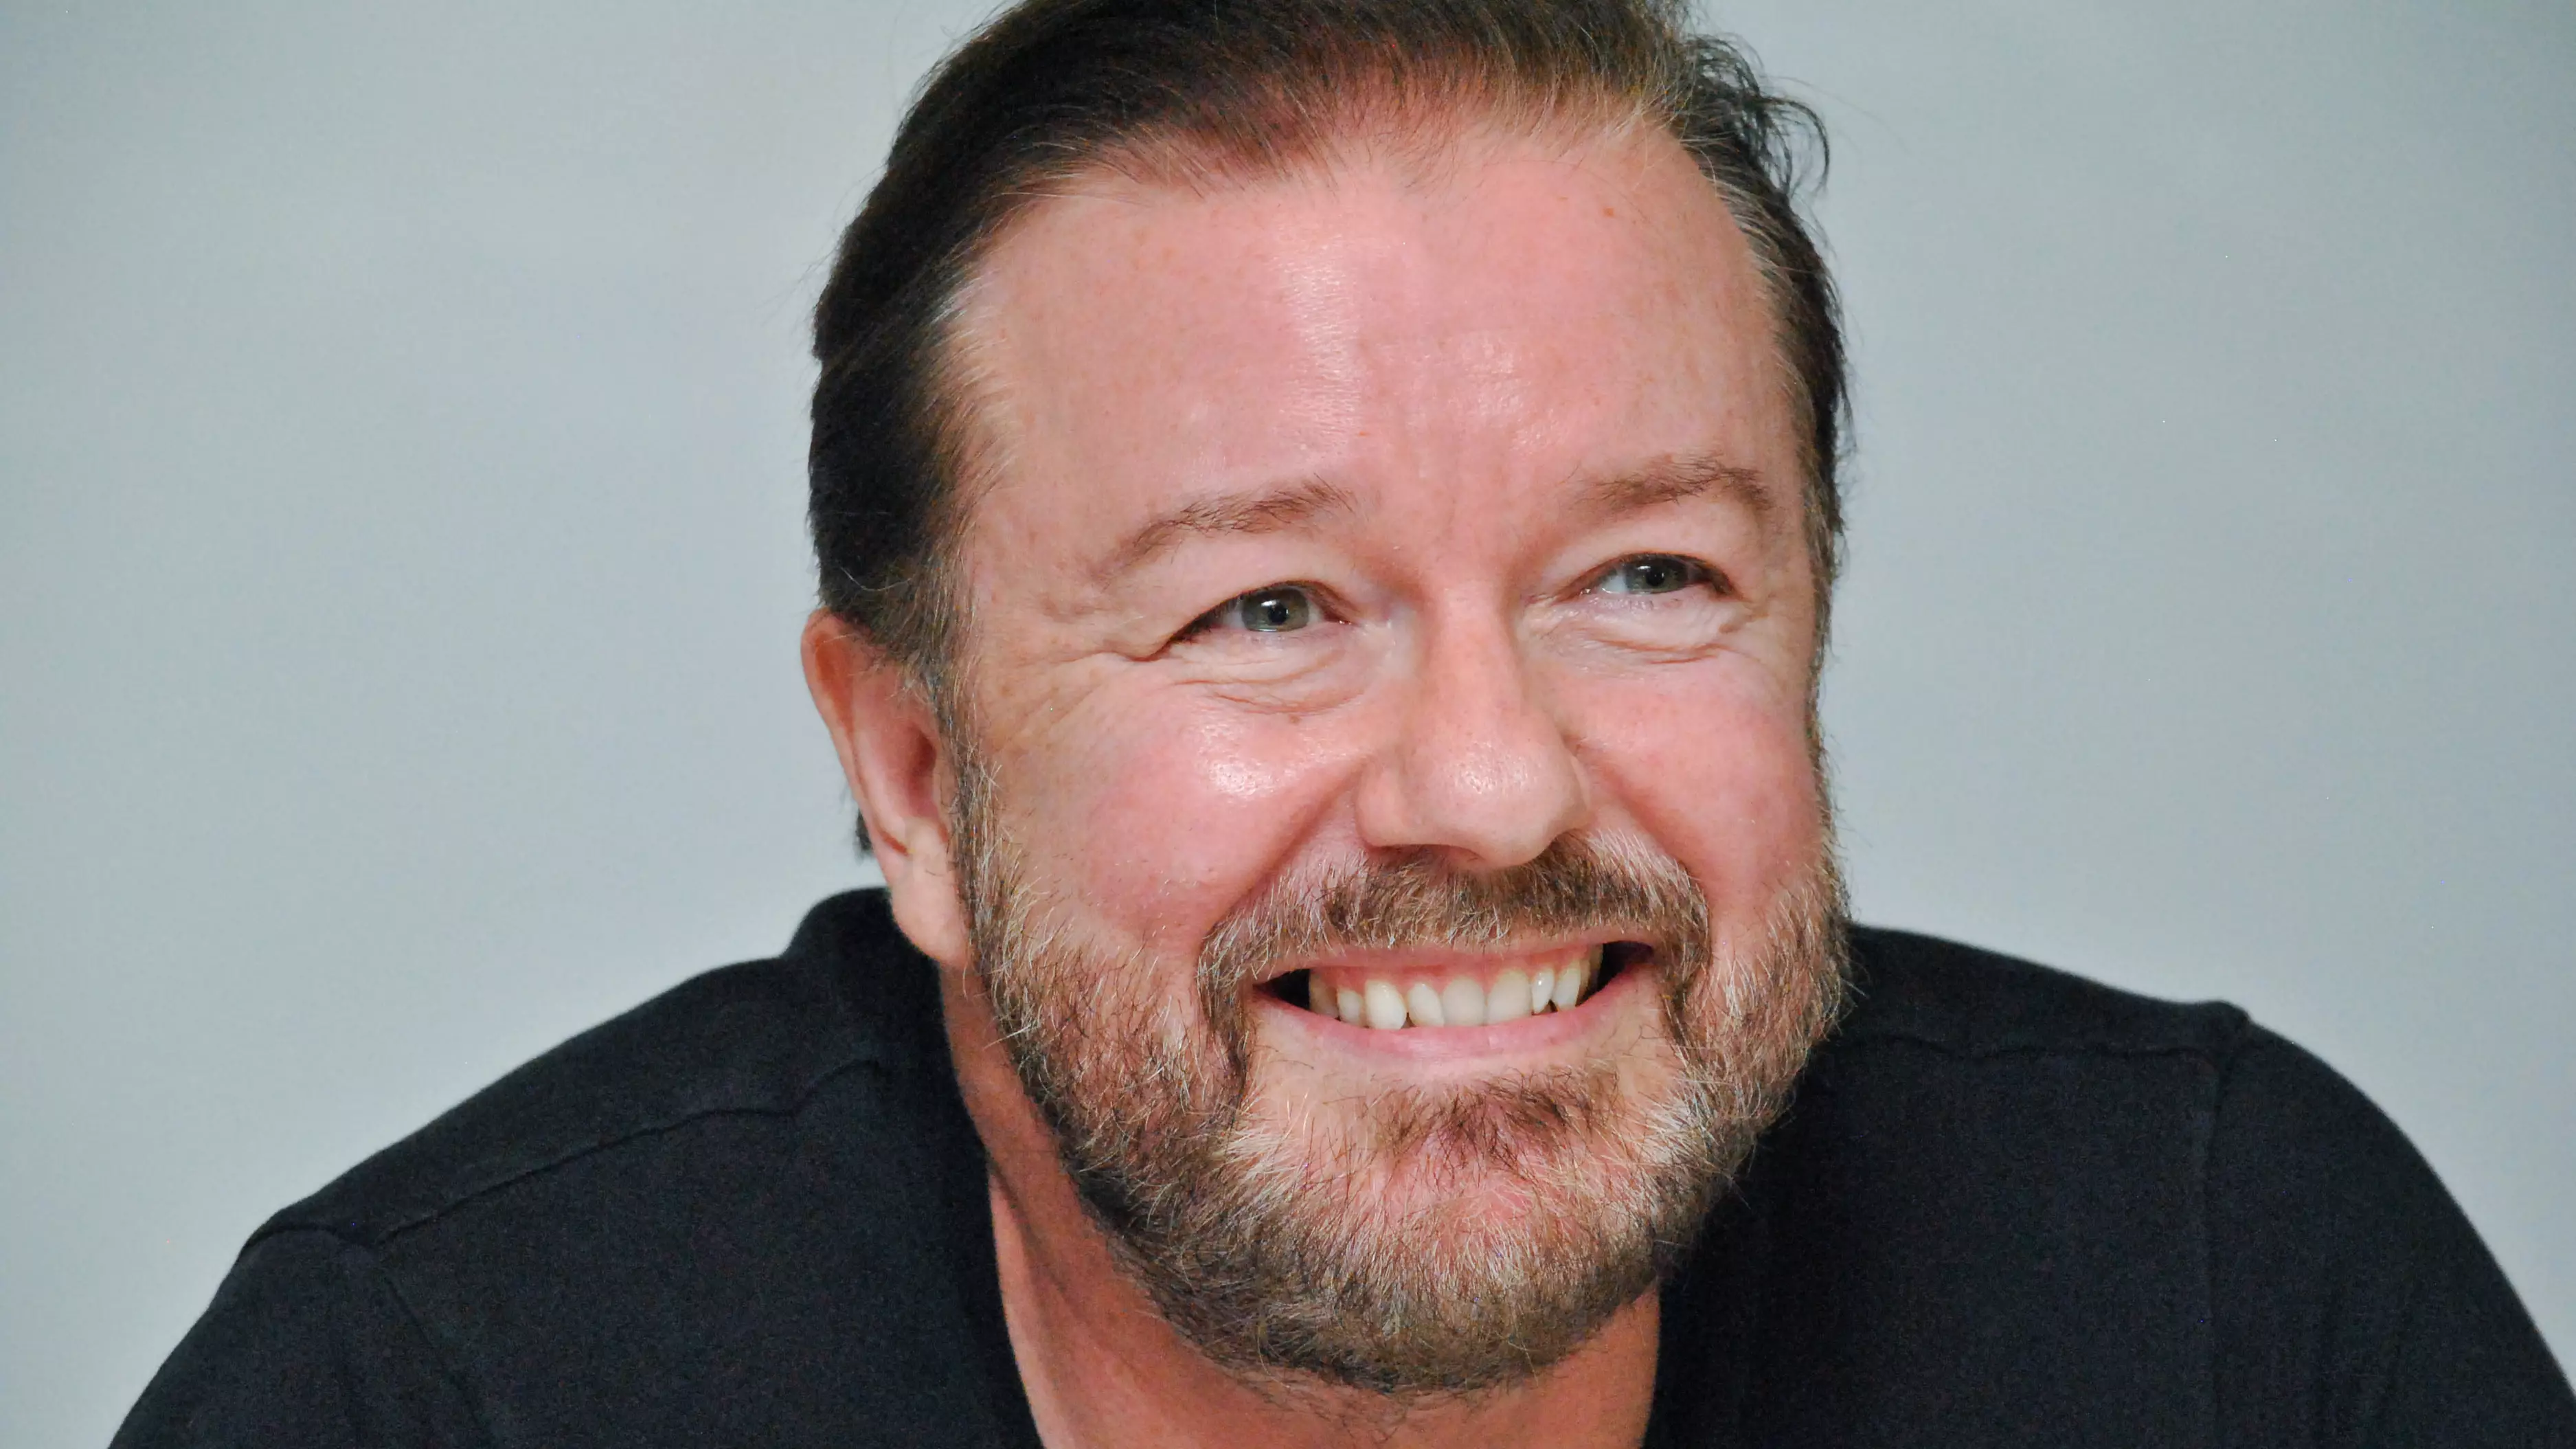 Ricky Gervais Says He Regrets One Joke He Made At The Golden Globes